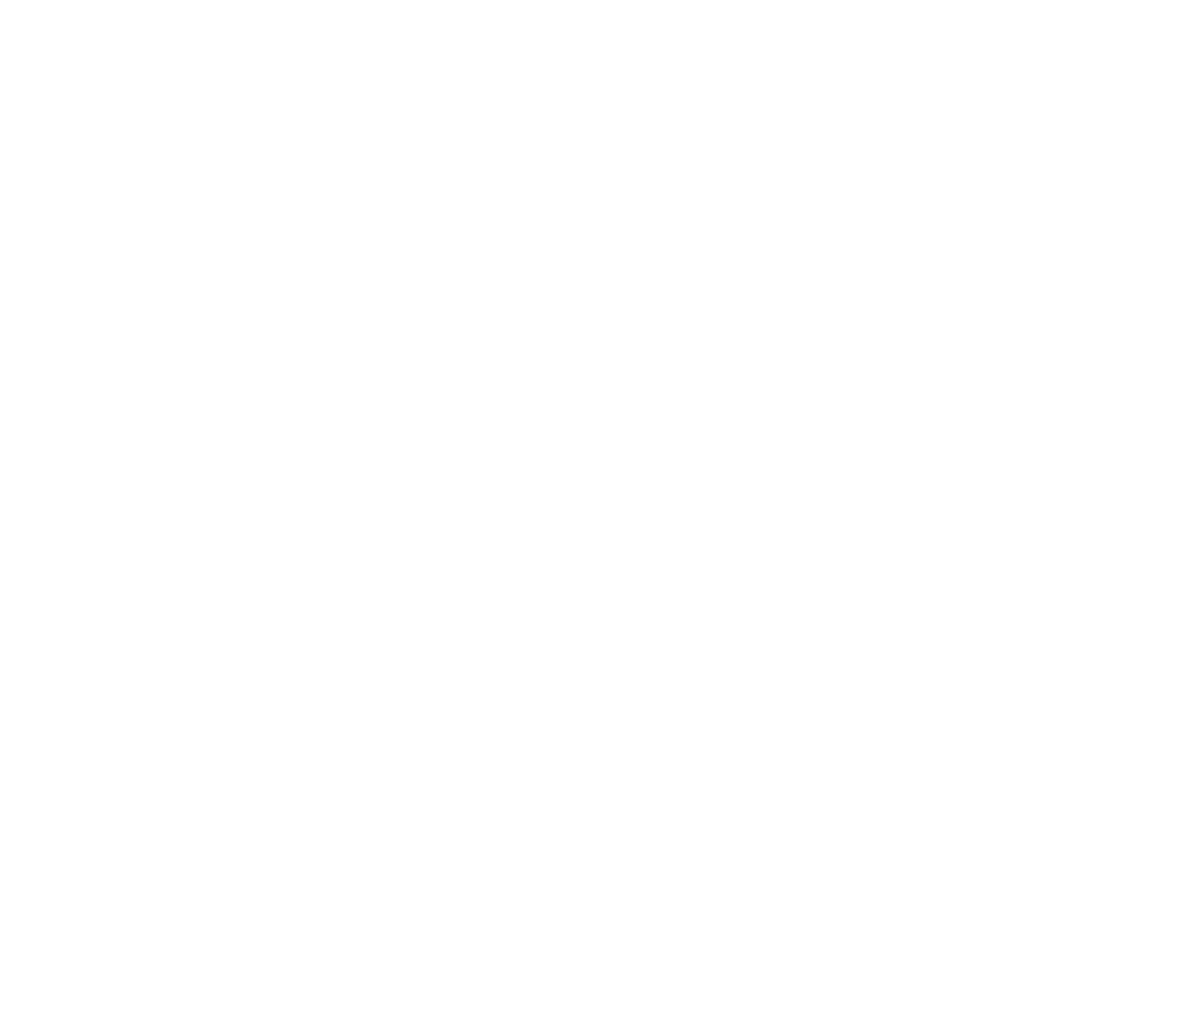 https://becomingselfmade.com/wp-content/themes/selfmade/images/BSM_2.png